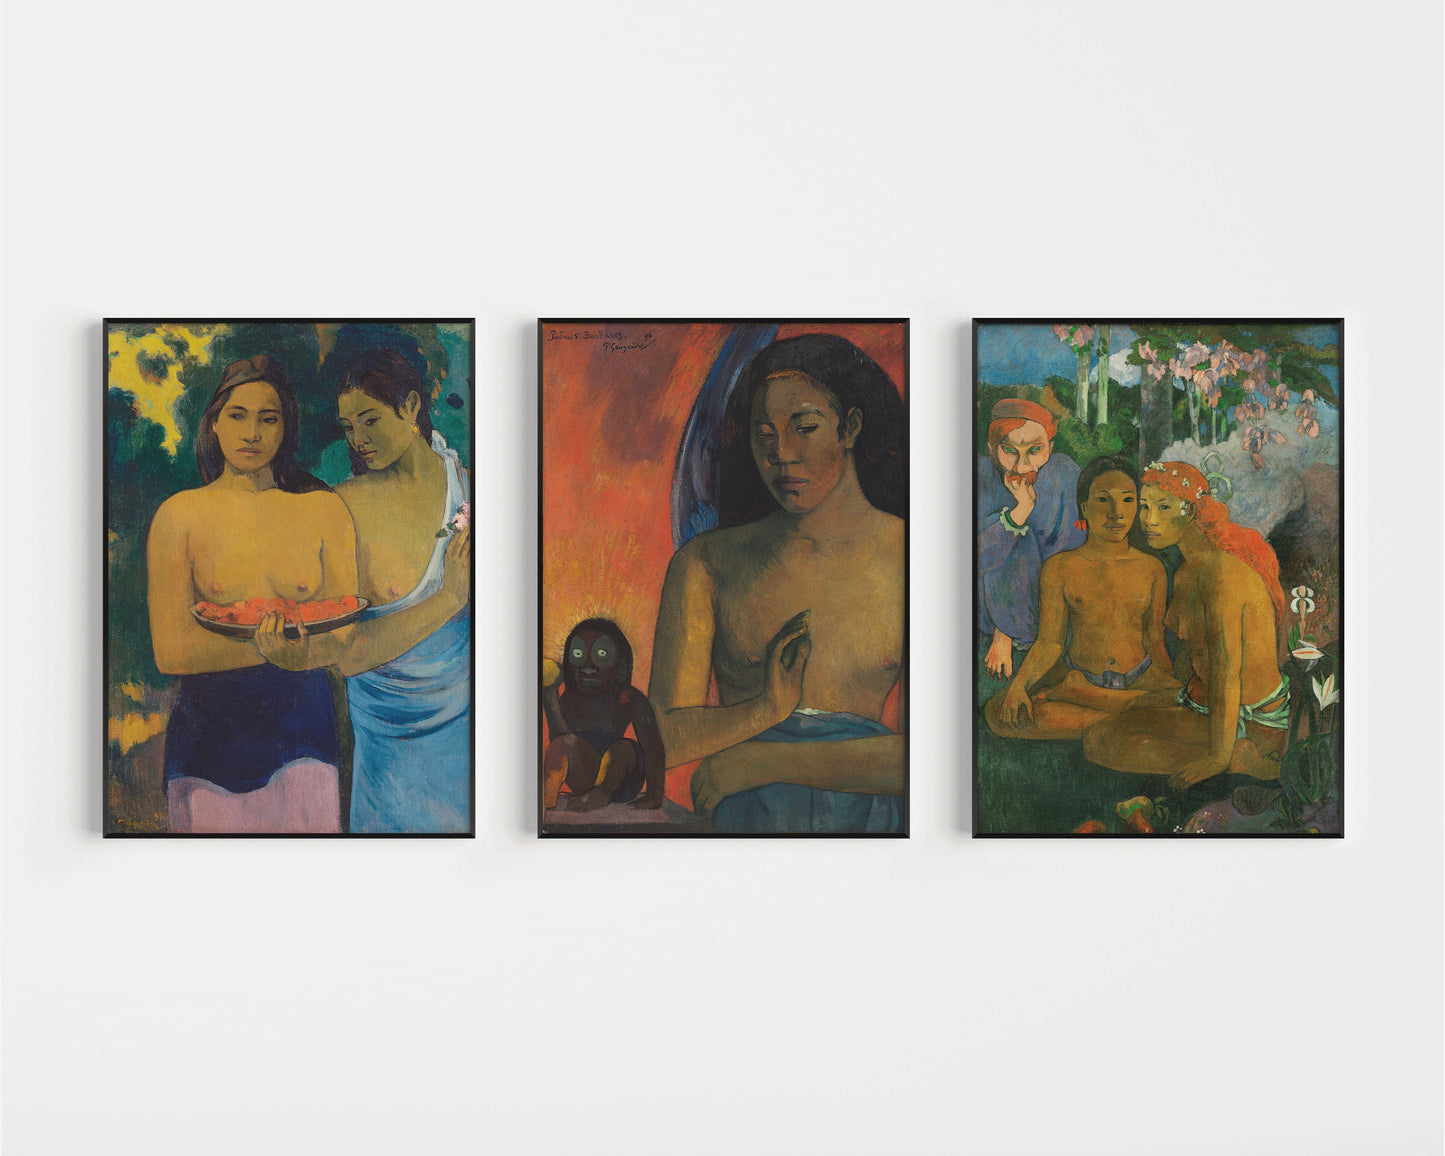 Paul Gauguin - Deux Femmes Tahitiennes, Poemes Barbares et Contes Barbares | Set of 3 Impressionist Paintings (available framed or unframed)